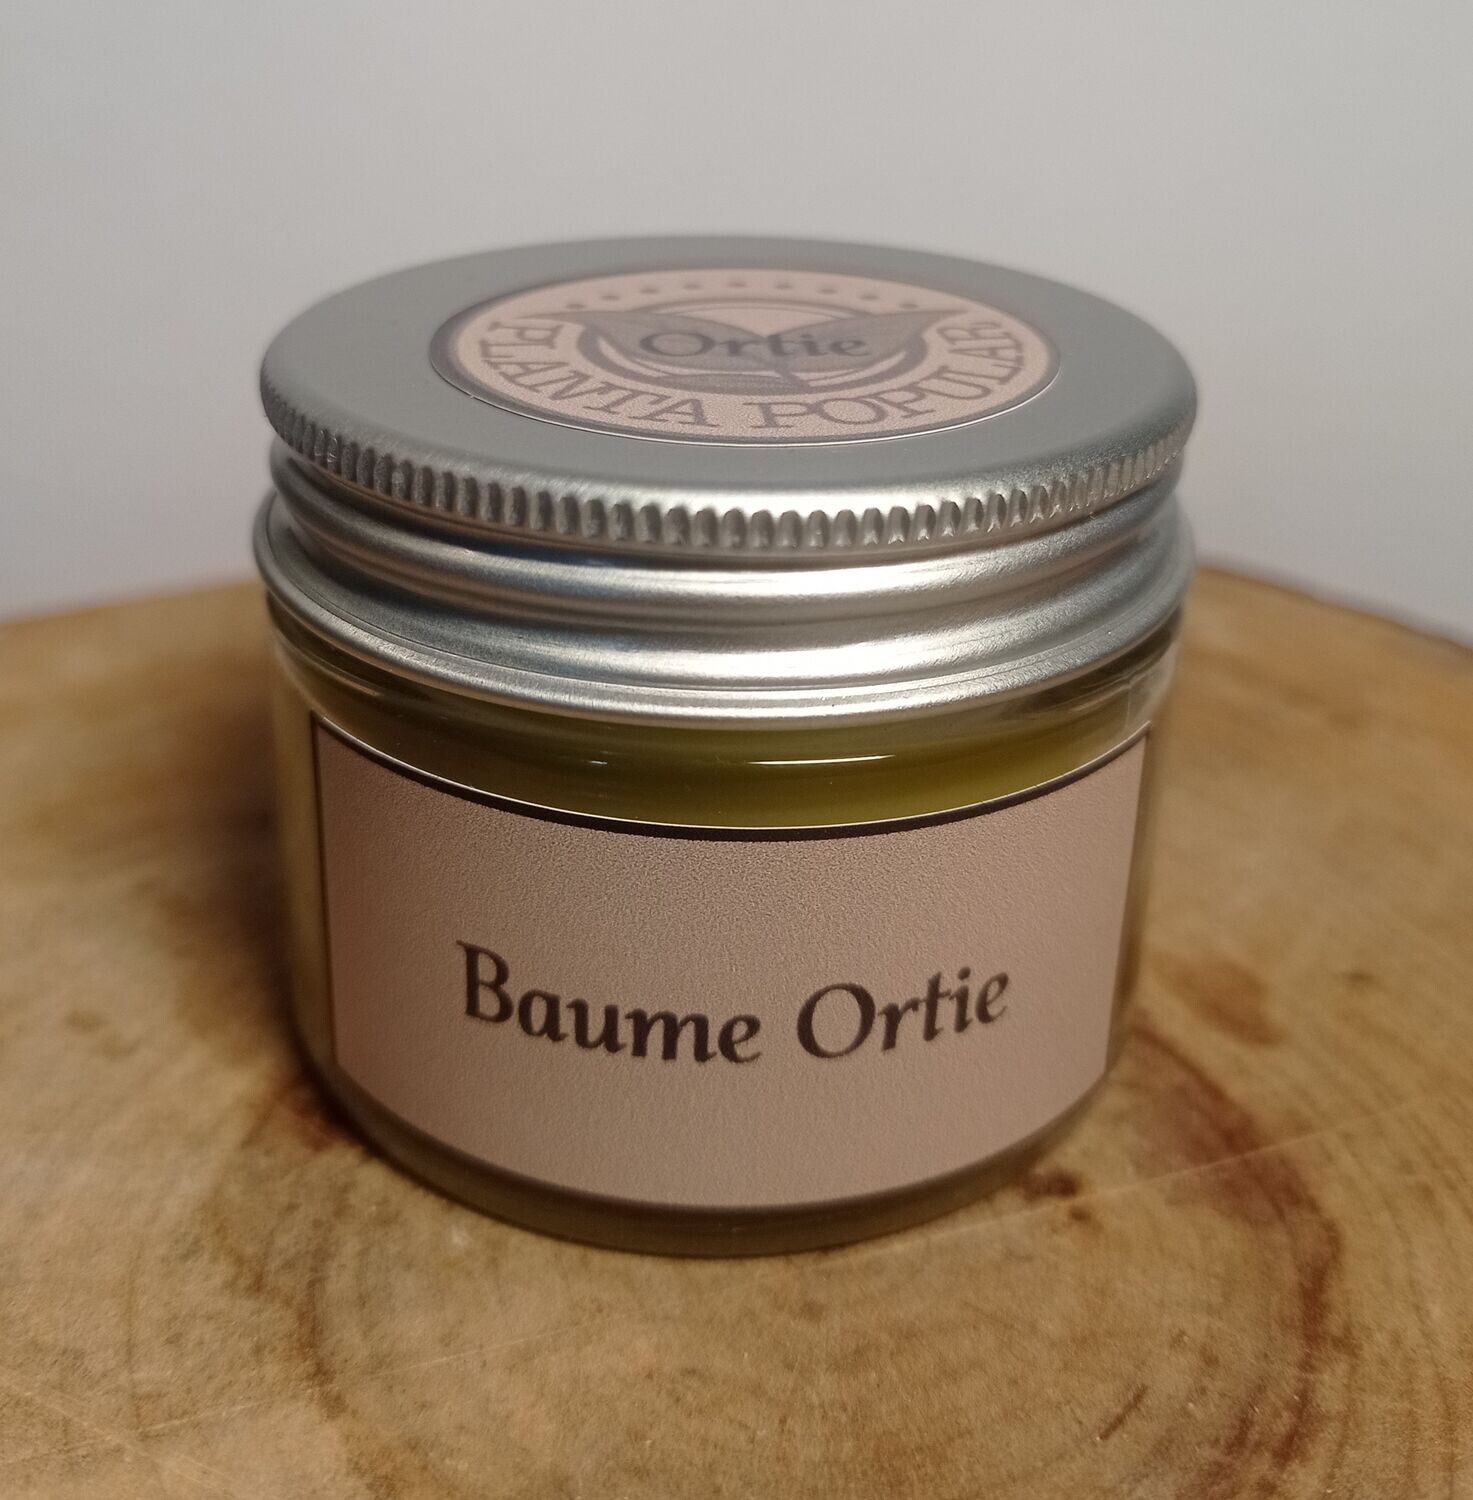 Baume Ortie